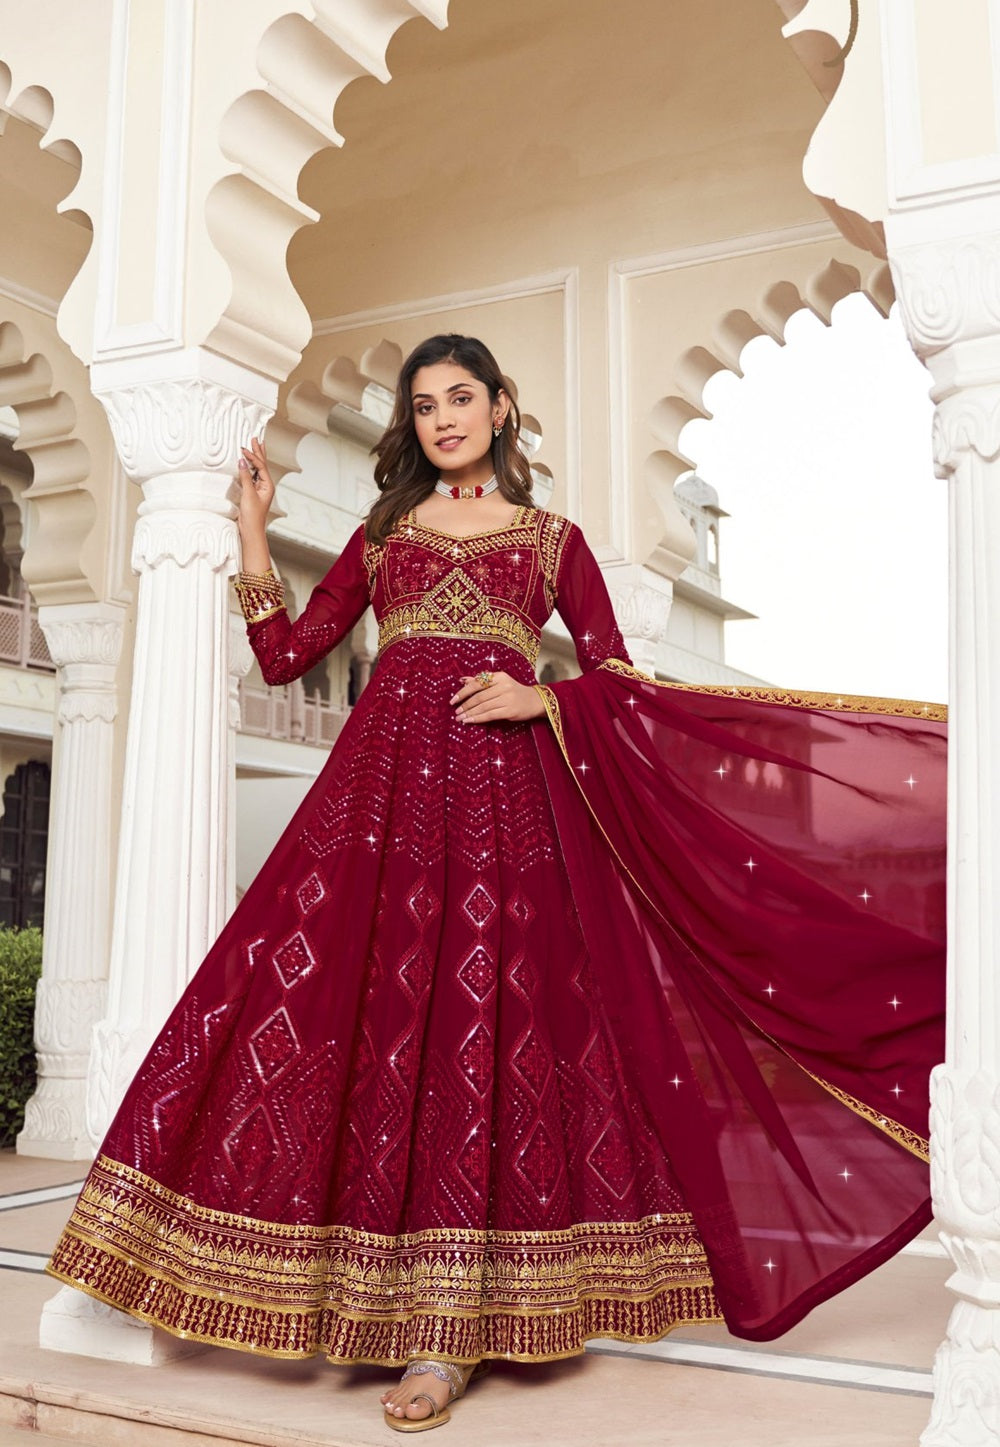 Georgette Embroidered Abaya Style Suit in Maroon